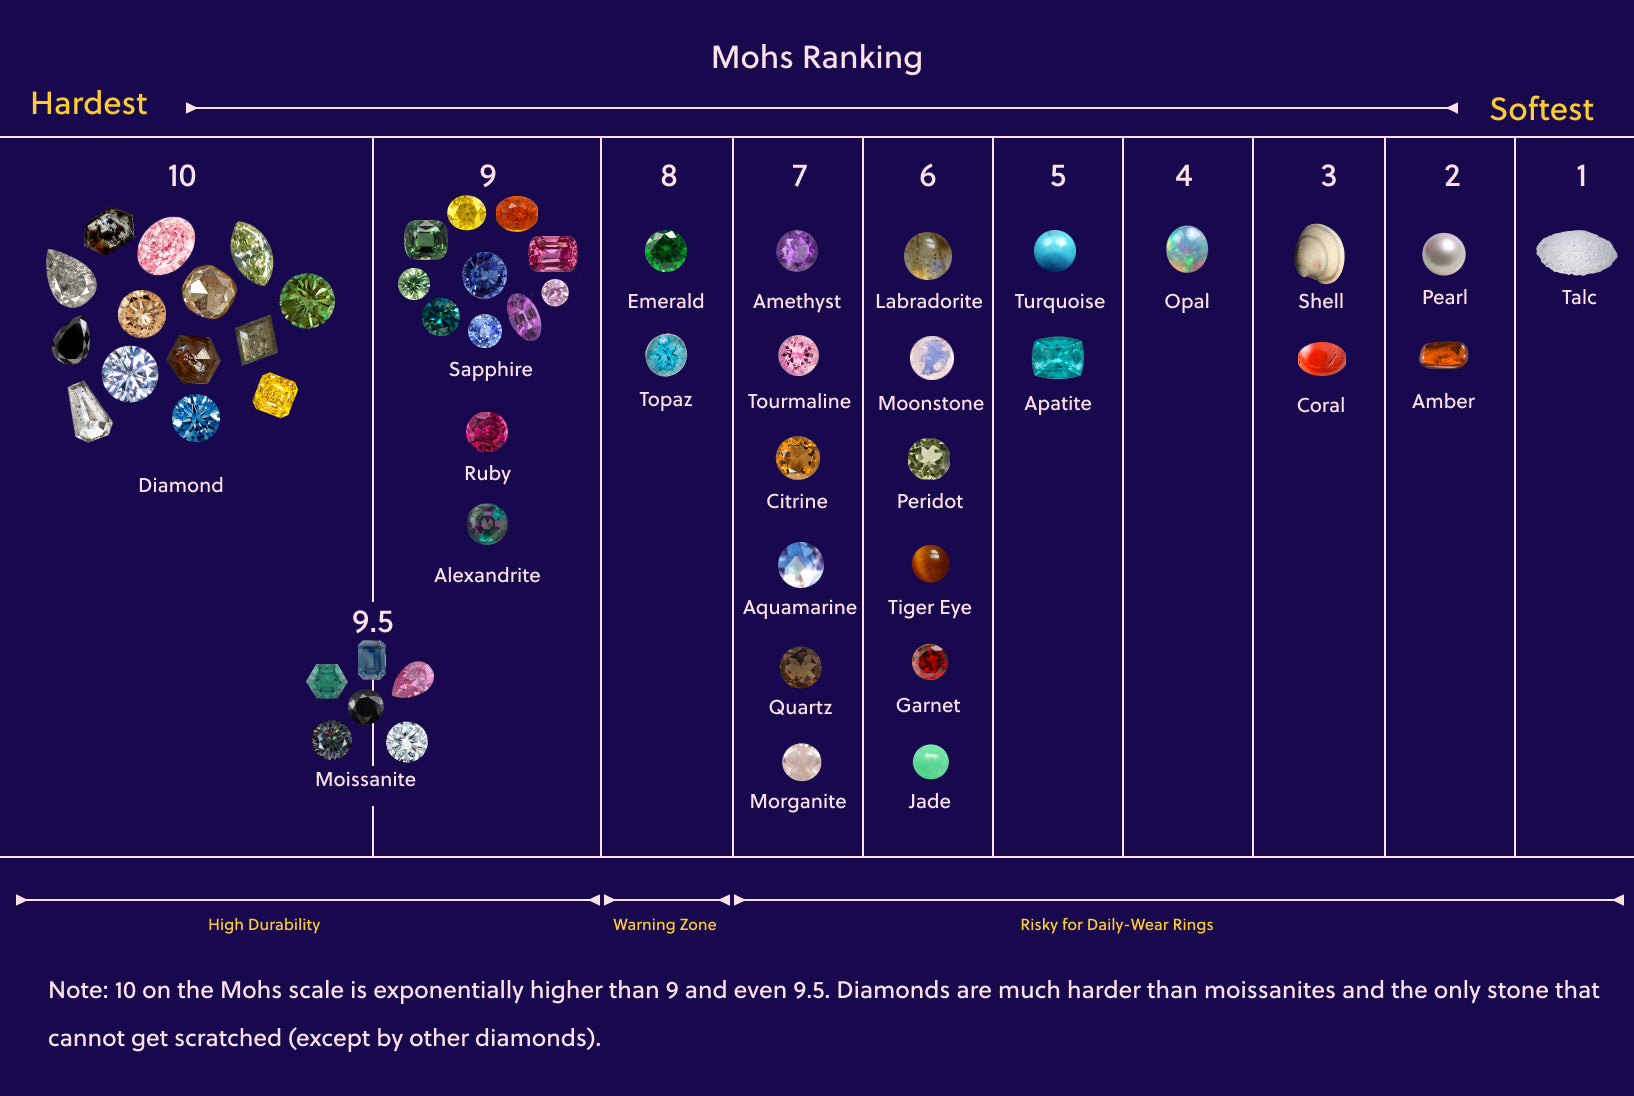 A chart with pictures of gemstones showing how each gem ranks in durability on the Mohs Scale